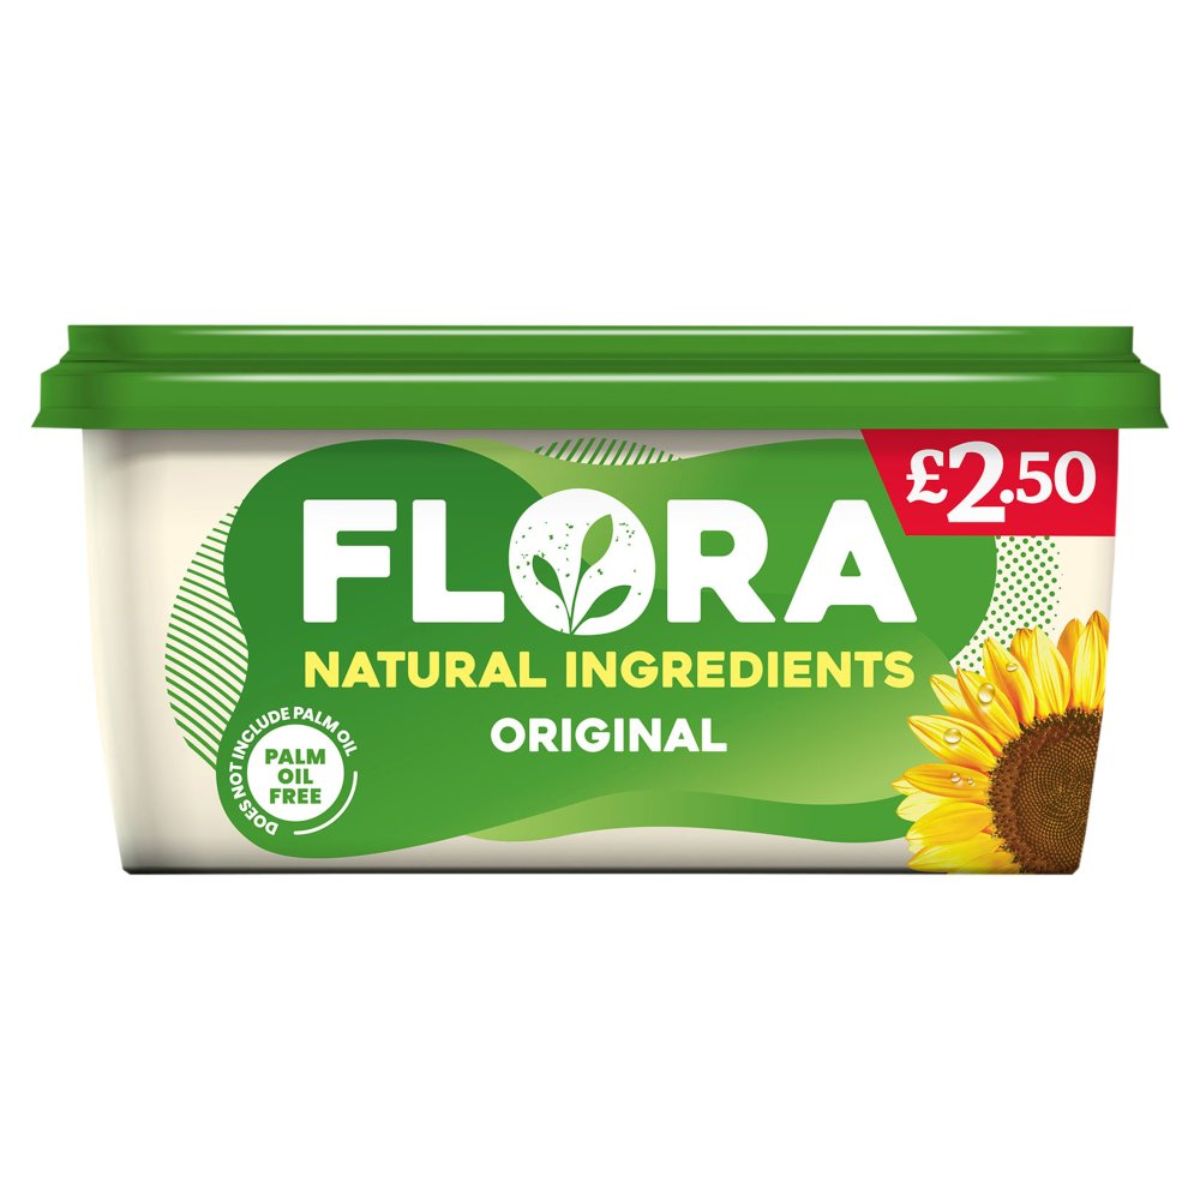 A tube of Flora - Original Spread with Natural Ingredients - 450g.